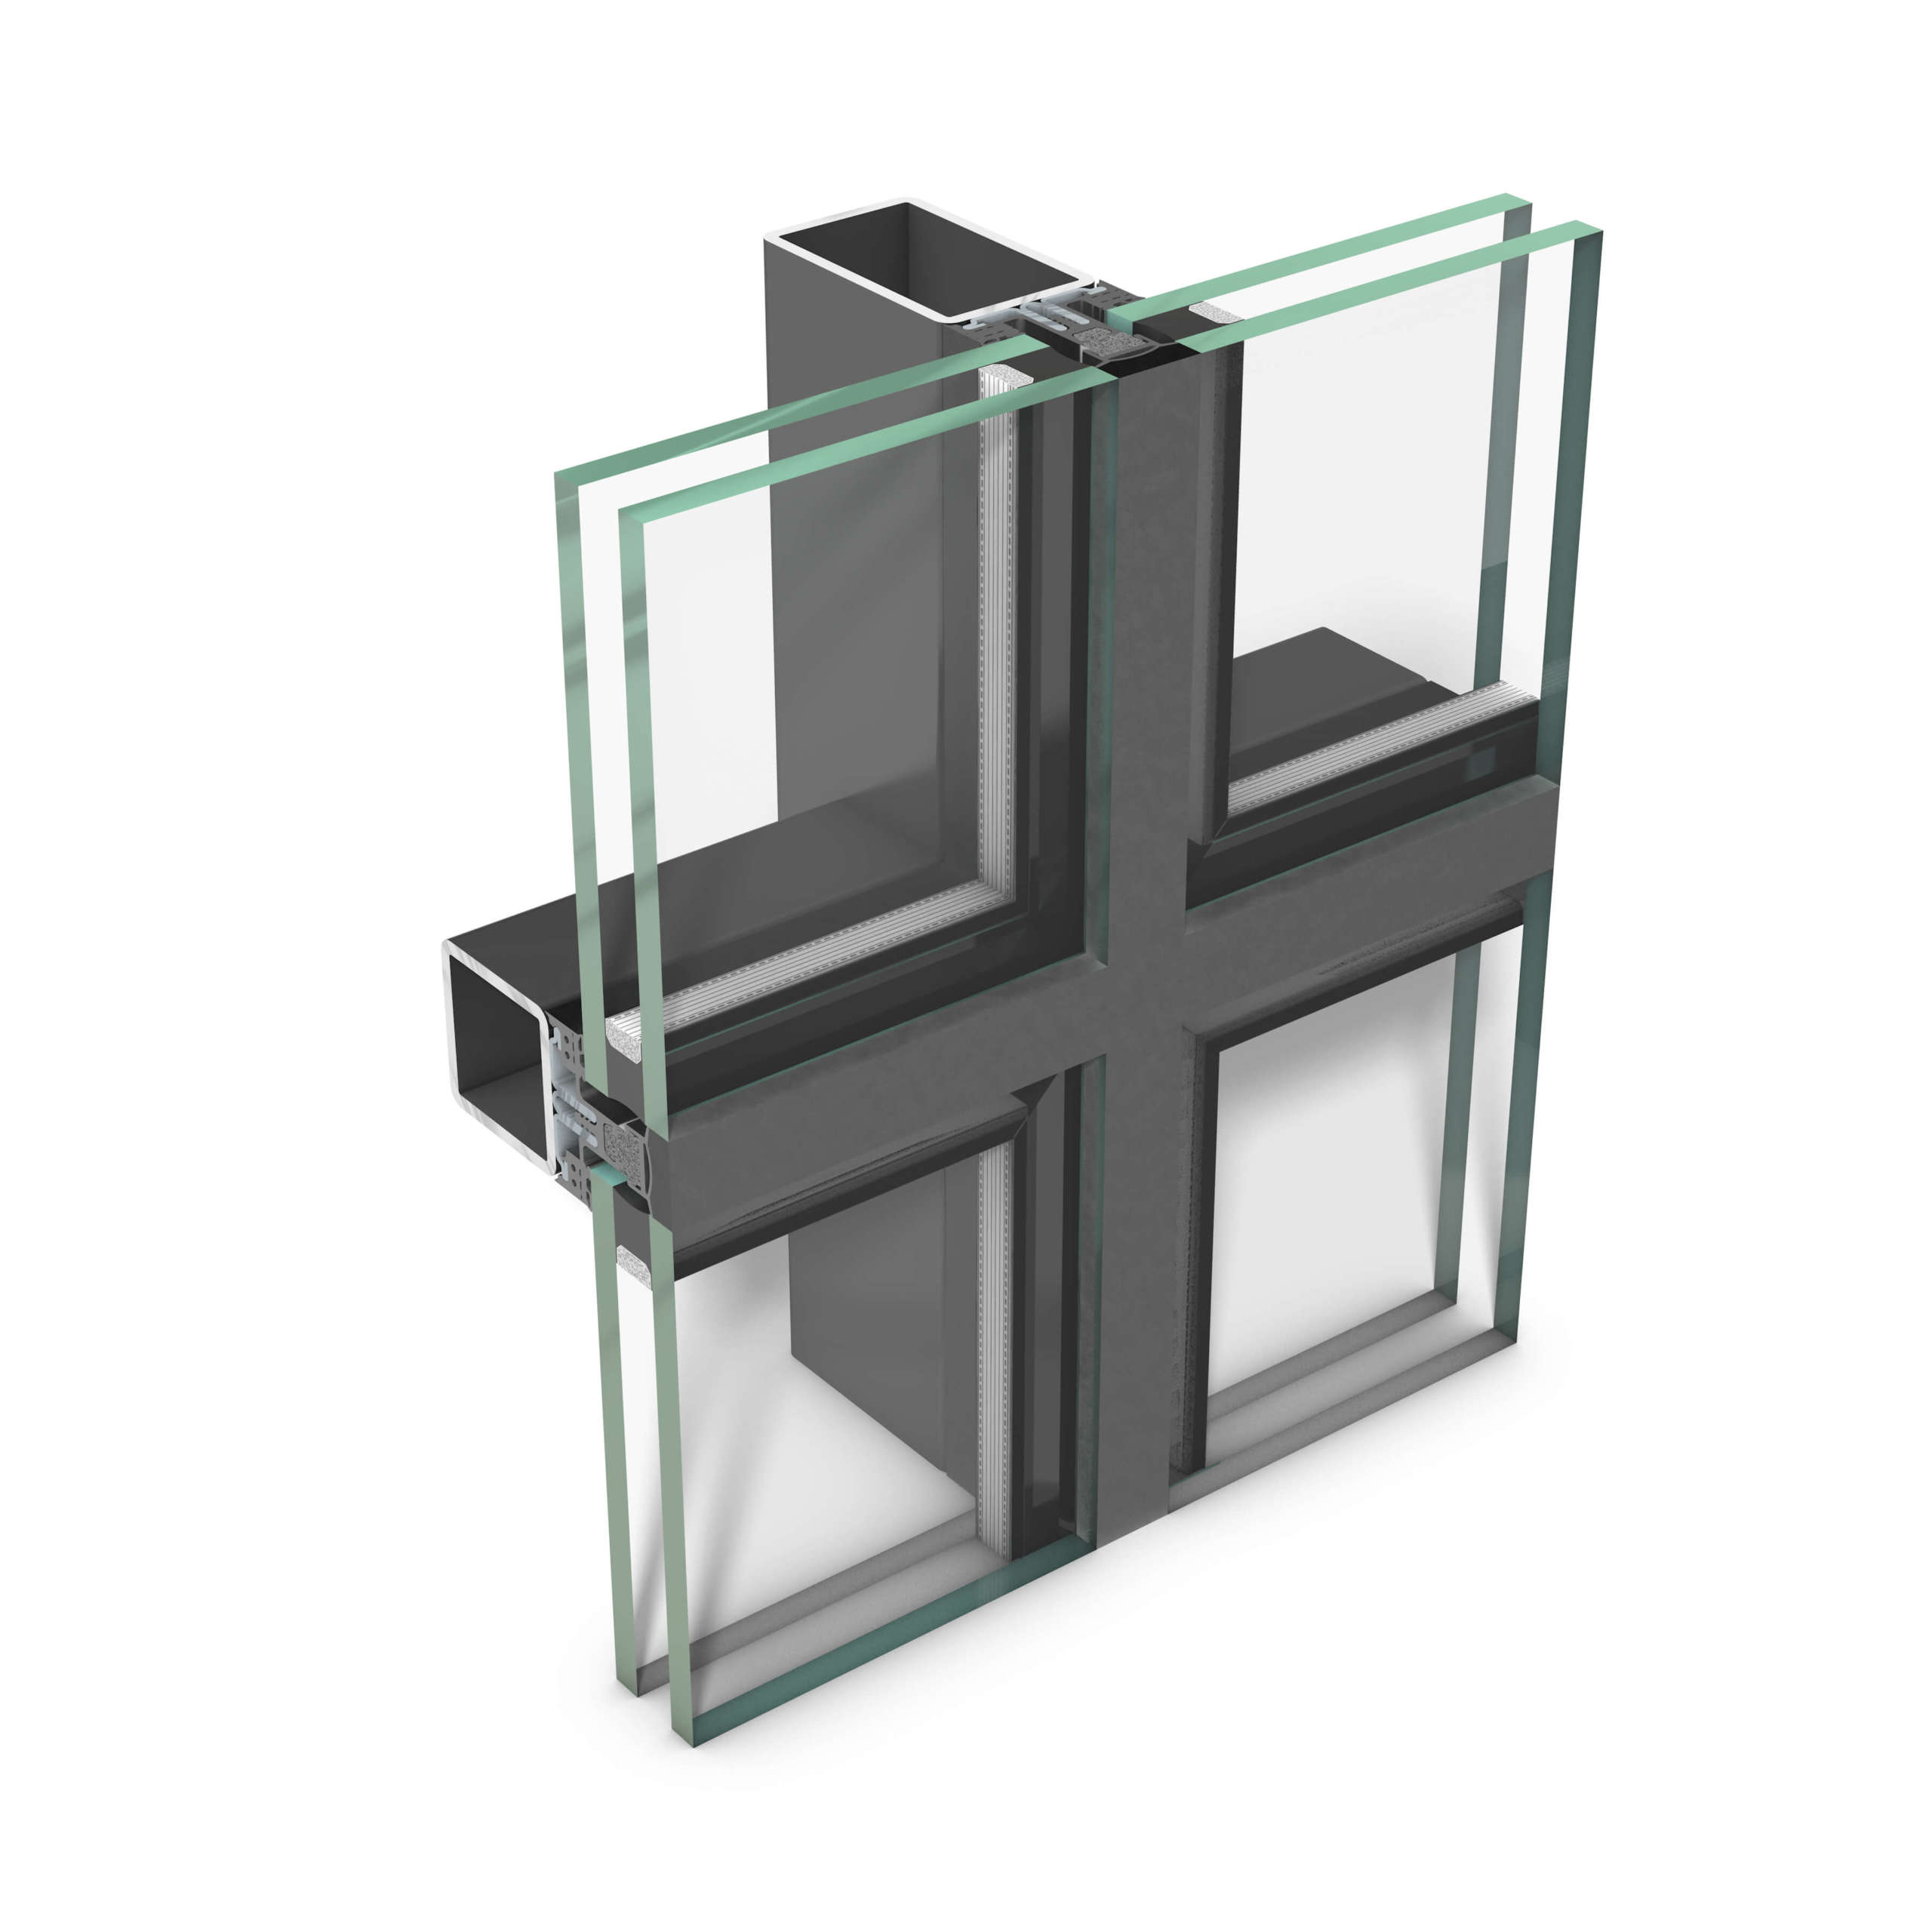 rp tec 50-1SG, all-glass curtain wall serving as an add-on structure of mullion-transom design